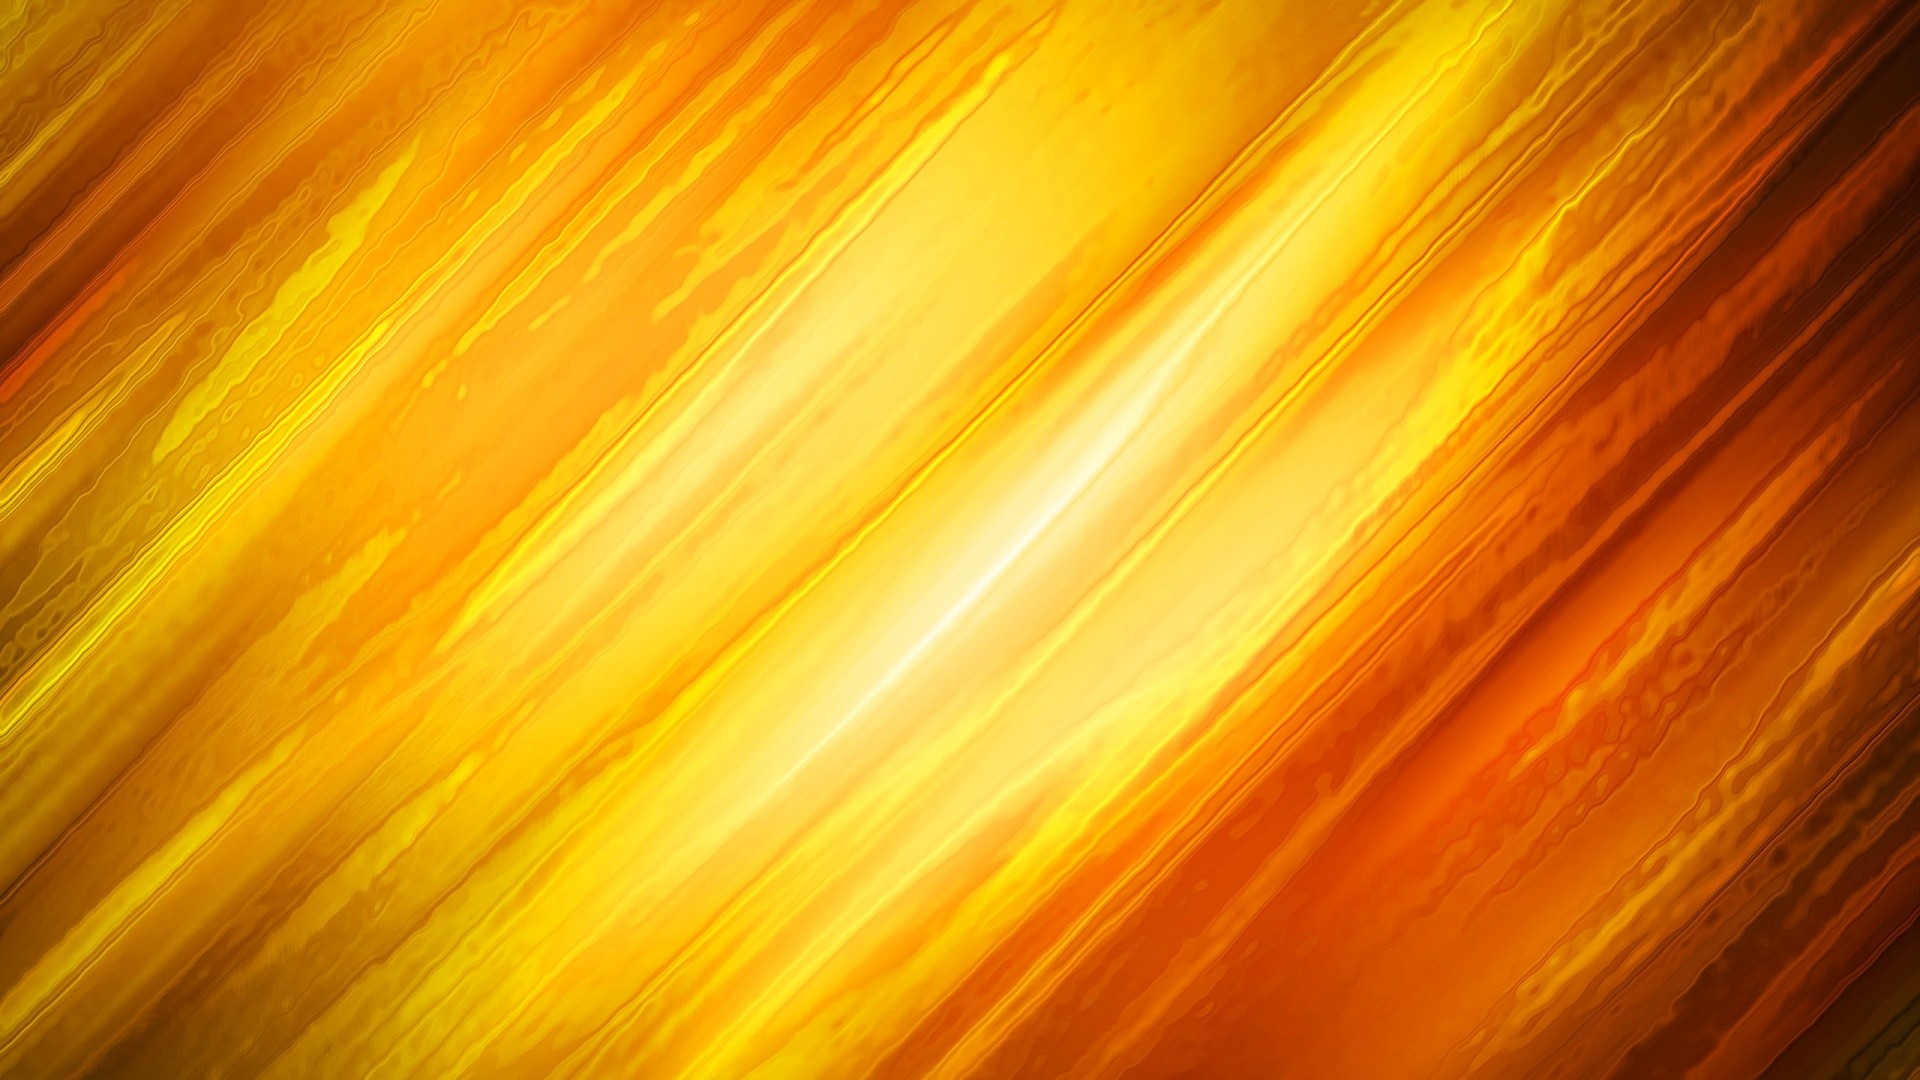 1920x1080 wallpapers background orange yellow abstract 